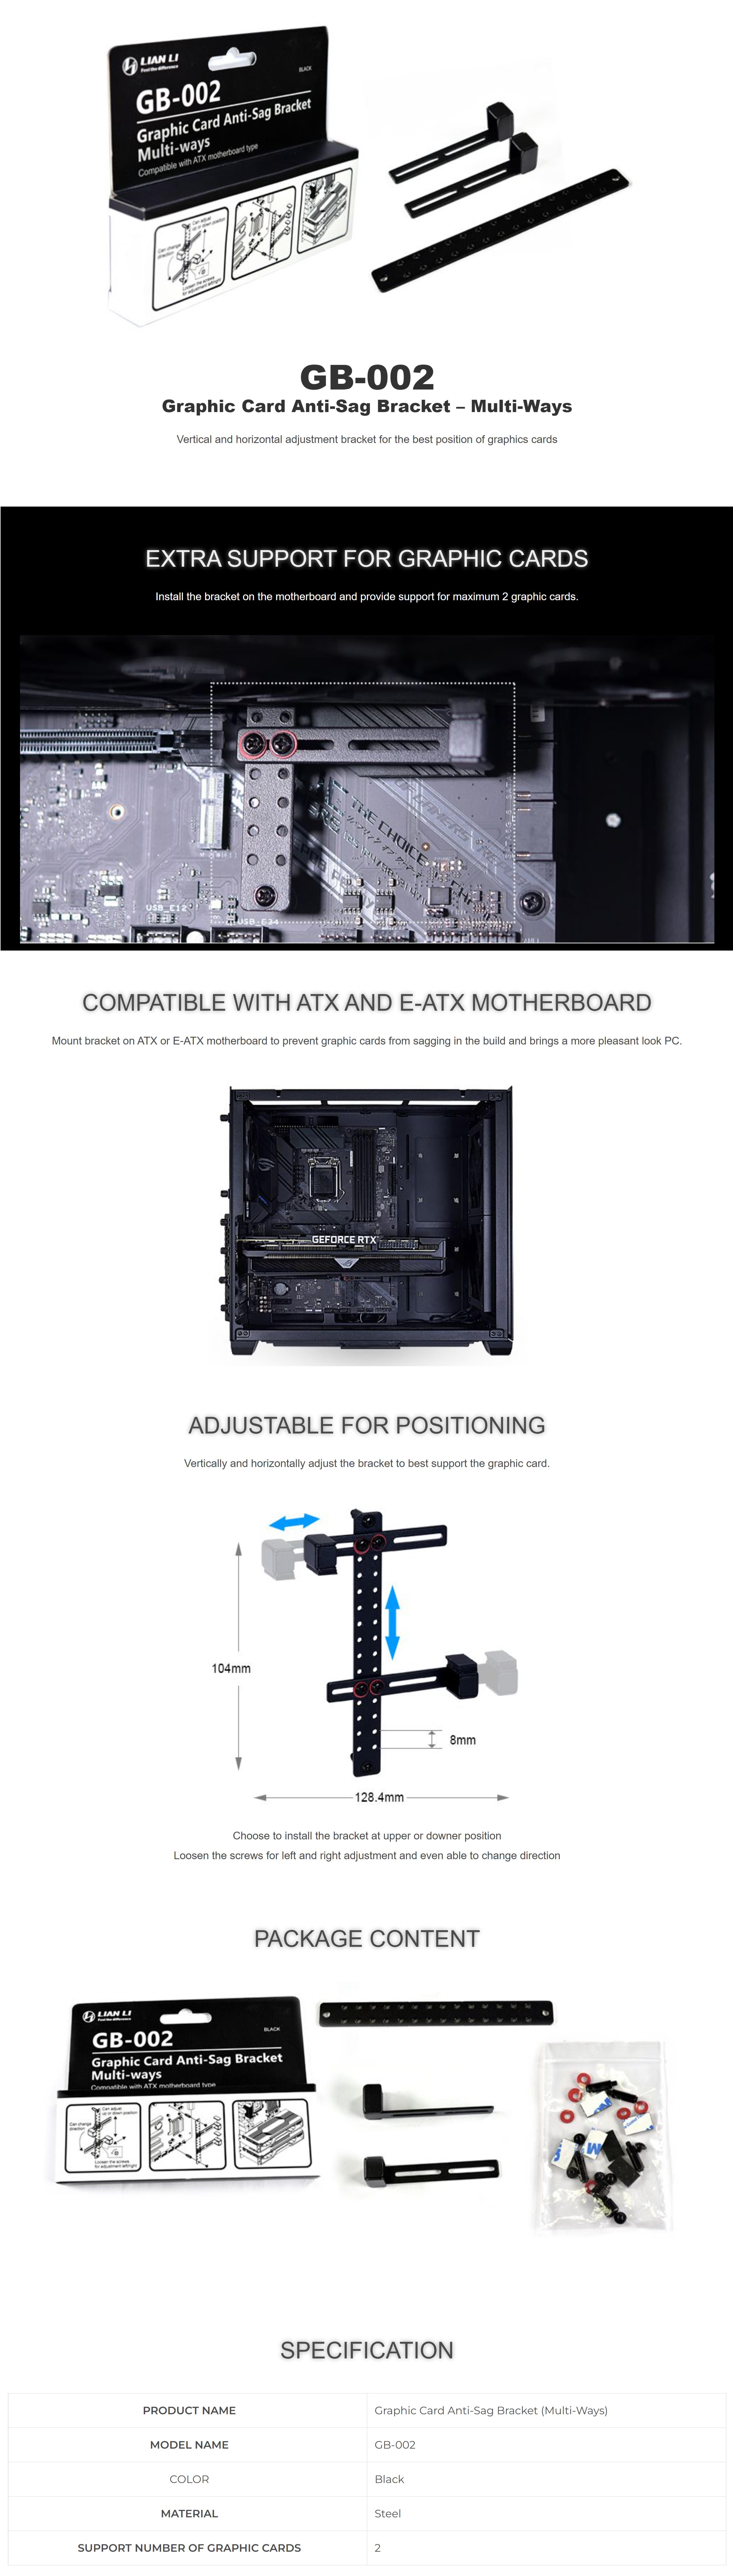 A large marketing image providing additional information about the product Lian Li GB-002 Anti-Sag GPU Brace Support - Additional alt info not provided